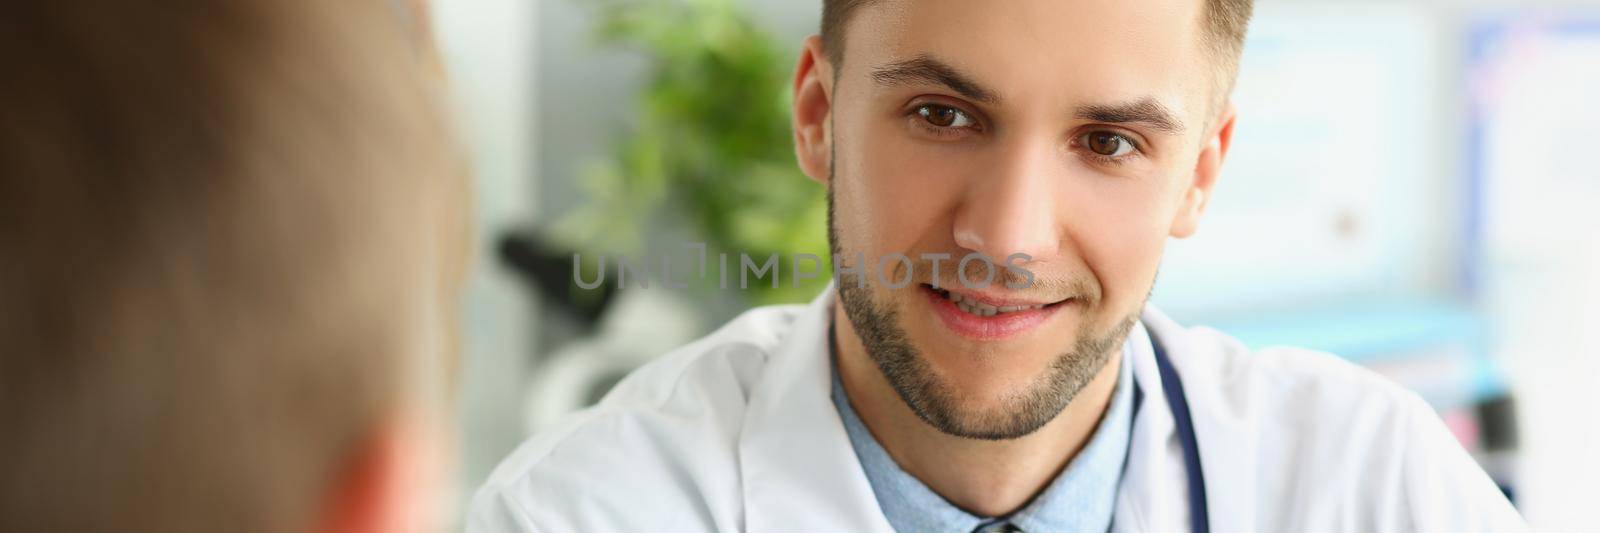 Male doctor listens to the patient, close-up face.Consultation in the clinic, patient complaints. Family medicine